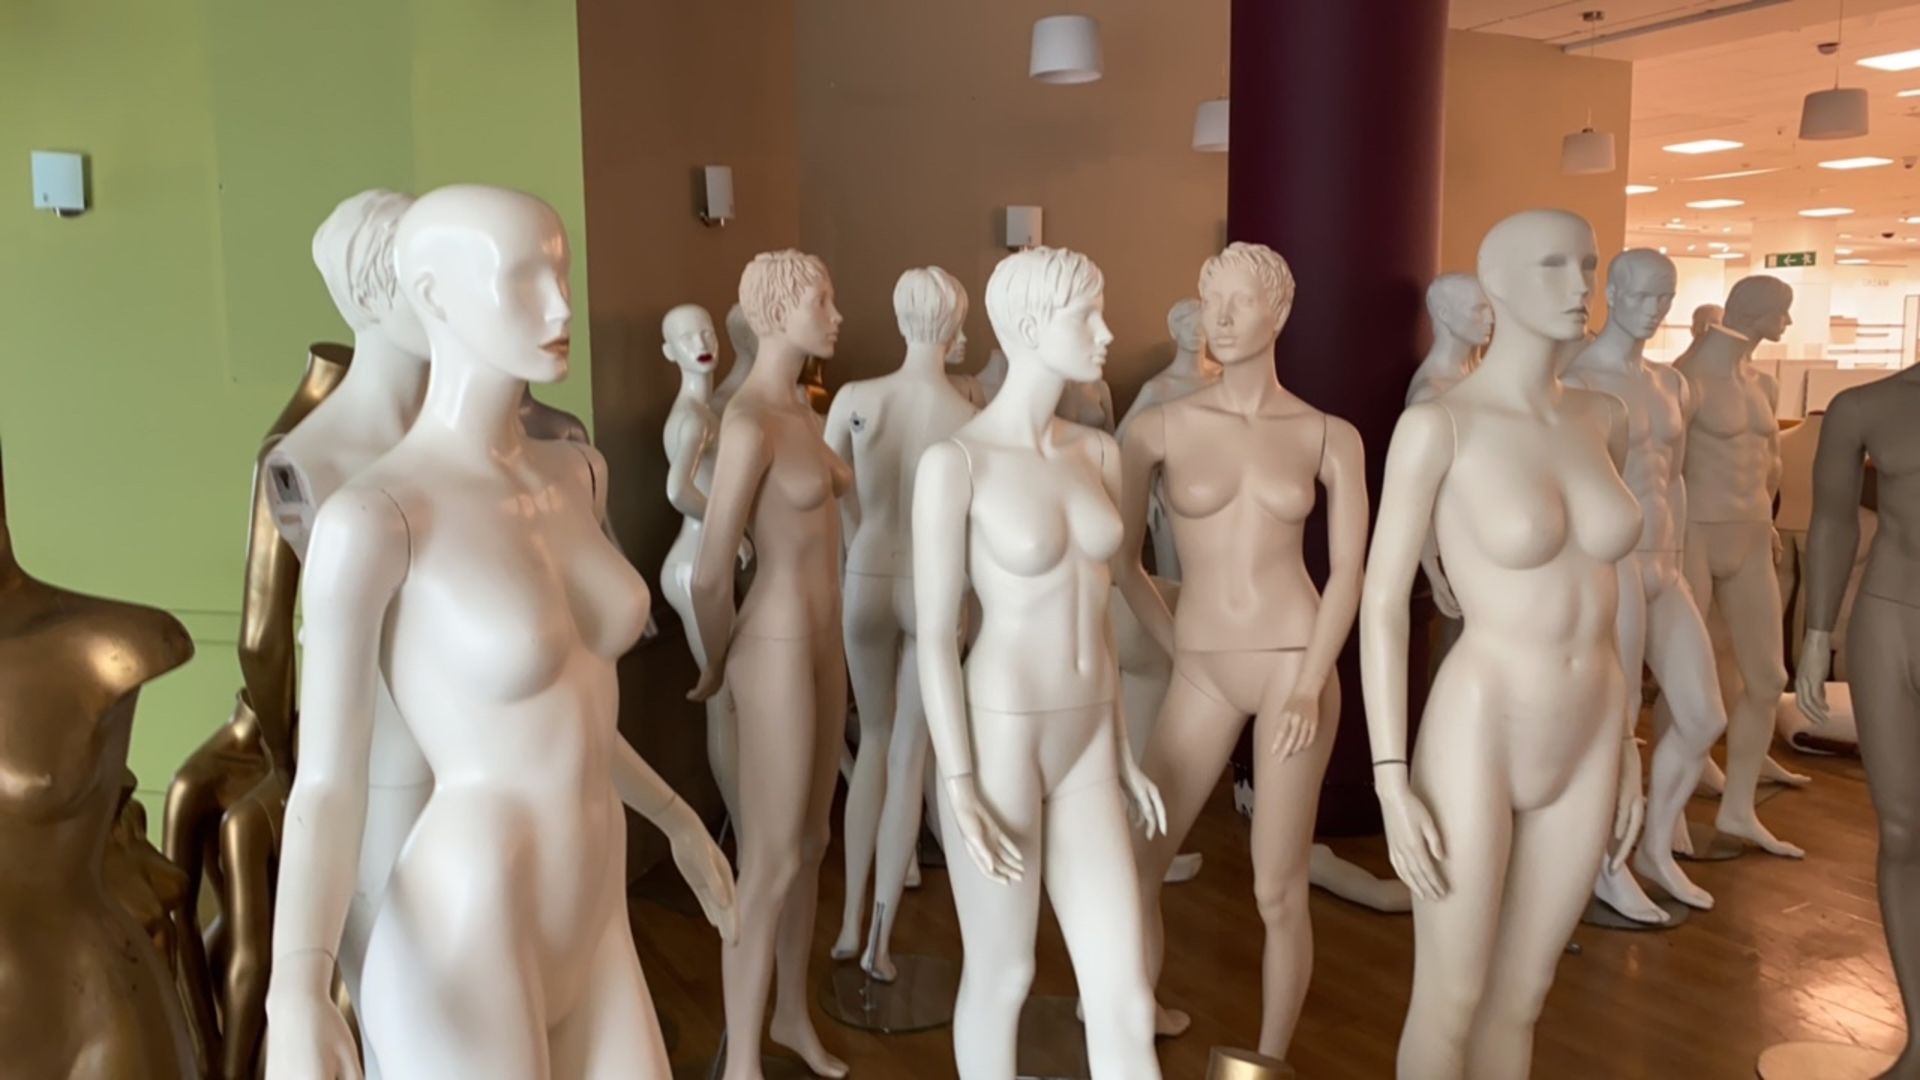 Job Lot Of Male And Female Adult Mannequins - Image 3 of 7